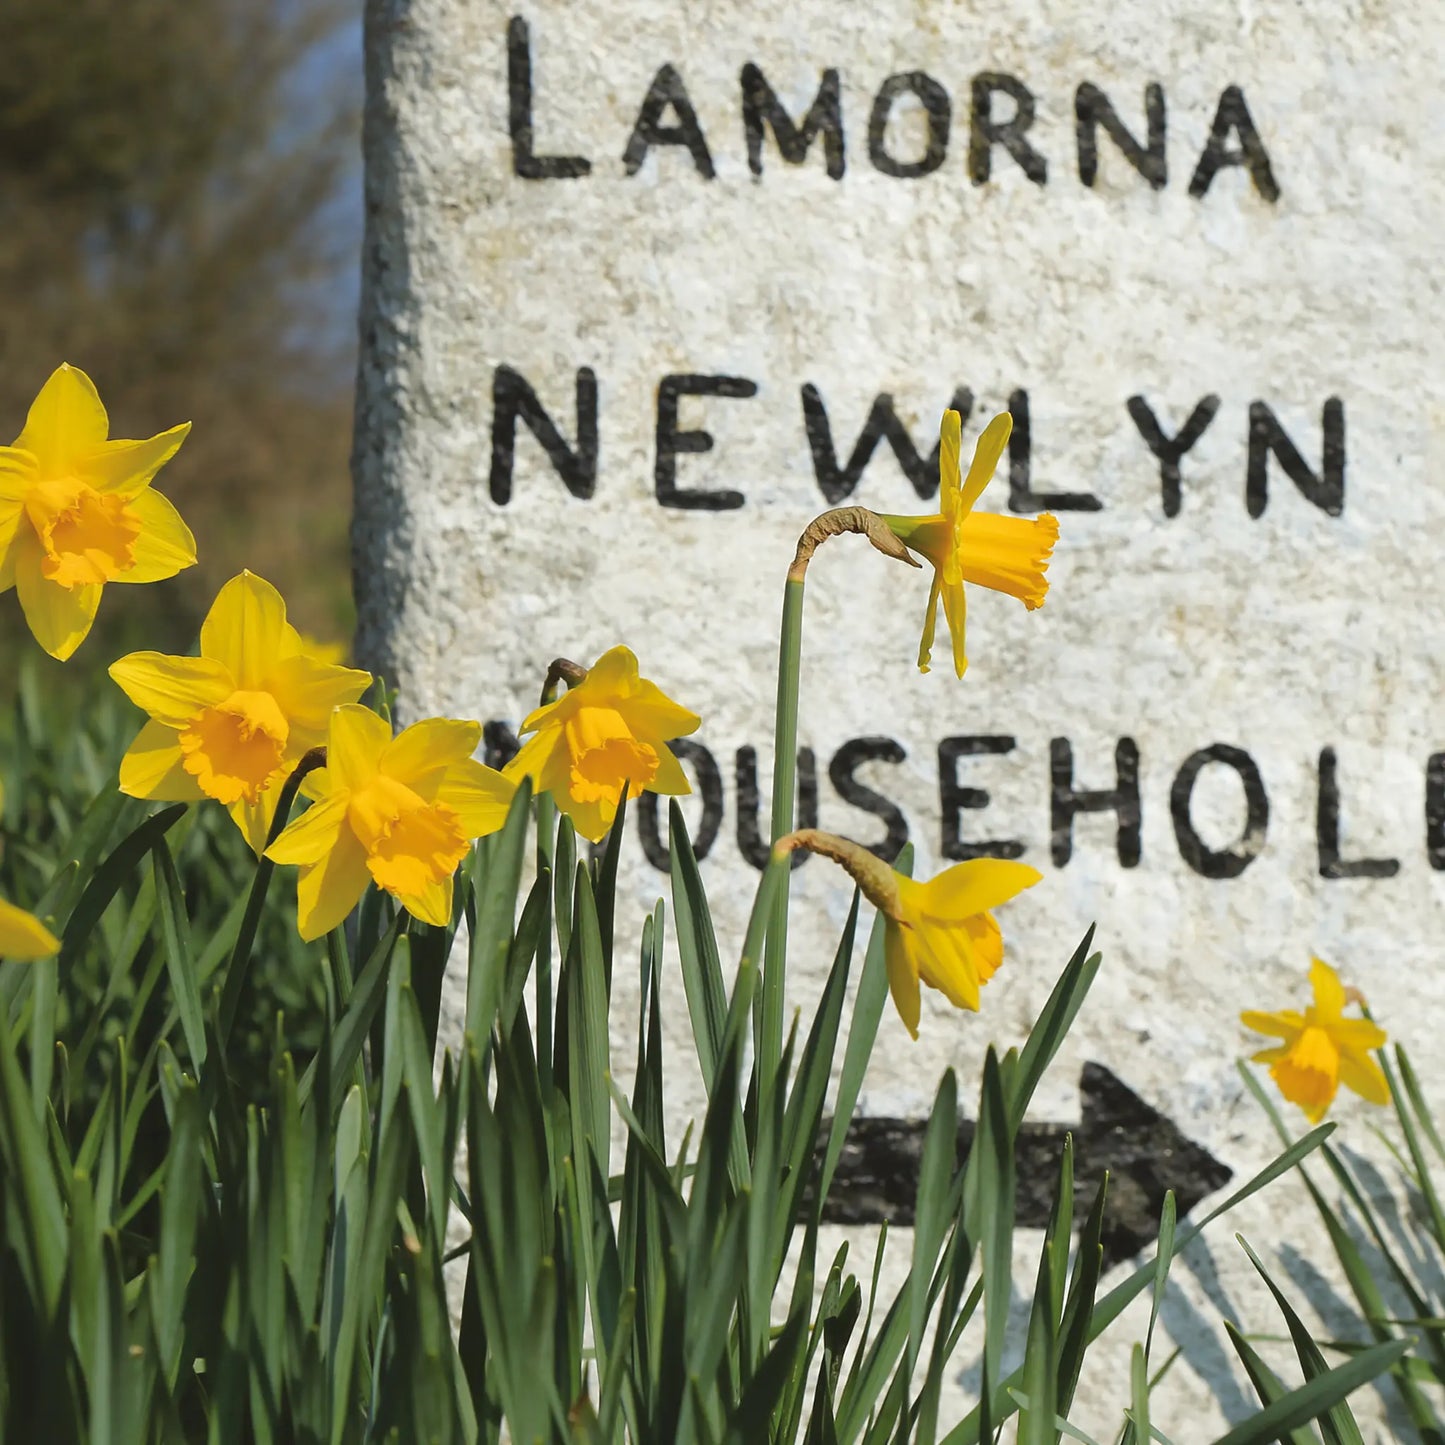 Cornish greetings card image of daffodils in front of the milestone to Lamorna, Newlyn and Mousehole